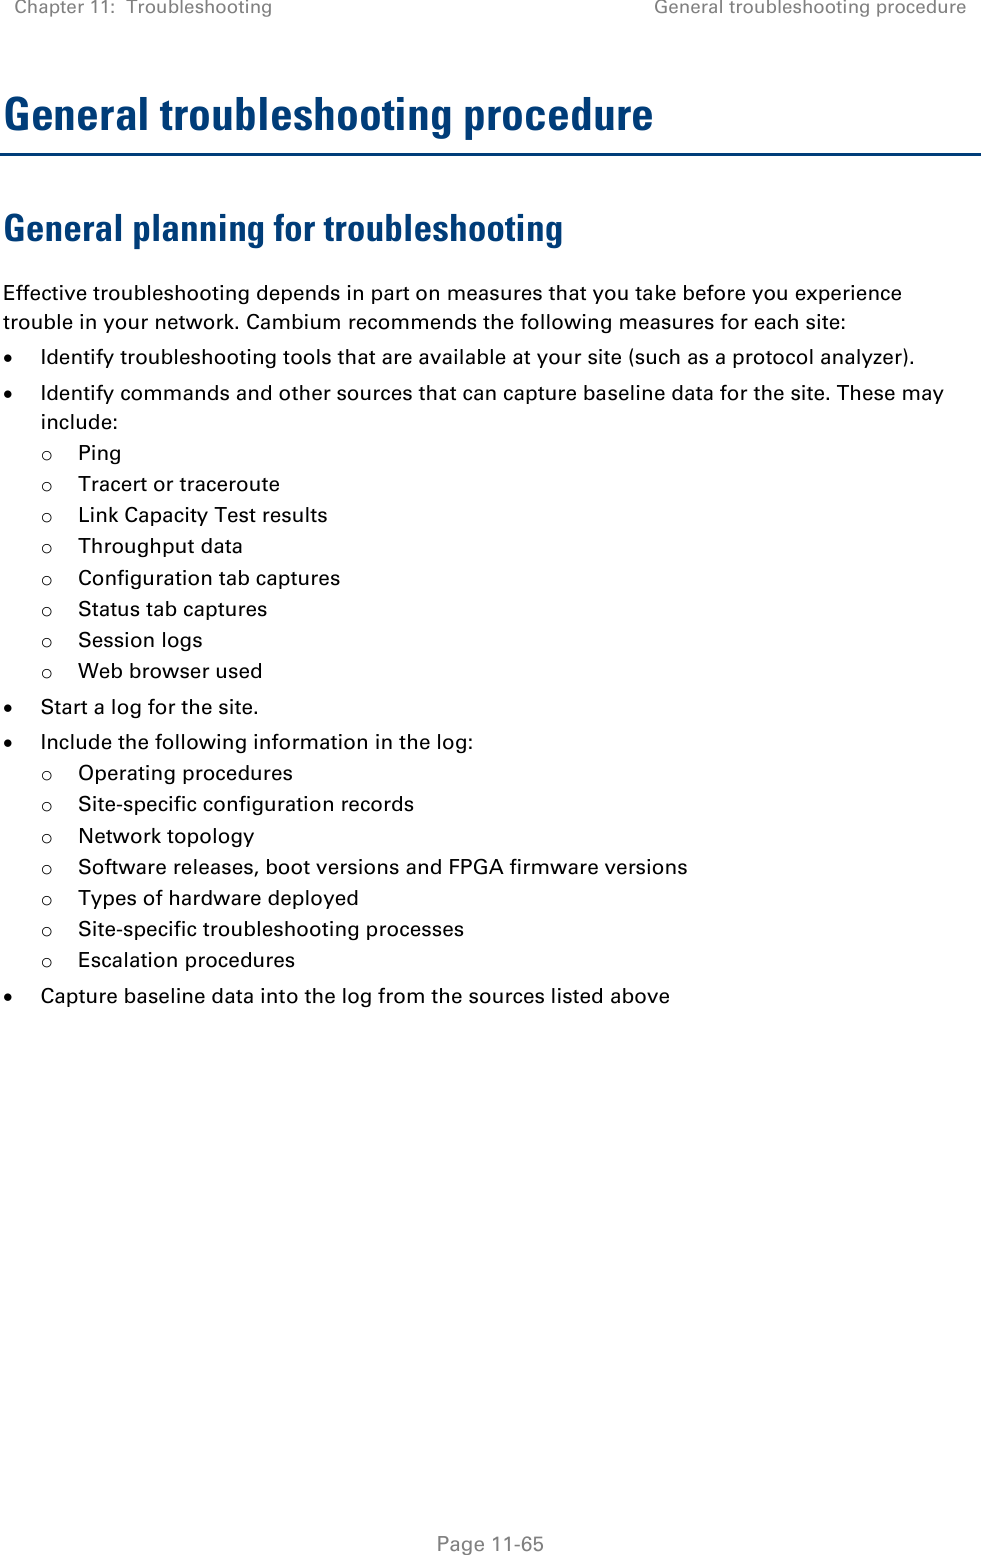 Chapter 11:  Troubleshooting General troubleshooting procedure   Page 11-65 General troubleshooting procedure General planning for troubleshooting Effective troubleshooting depends in part on measures that you take before you experience trouble in your network. Cambium recommends the following measures for each site:  Identify troubleshooting tools that are available at your site (such as a protocol analyzer).  Identify commands and other sources that can capture baseline data for the site. These may include: o Ping o Tracert or traceroute o Link Capacity Test results o Throughput data o Configuration tab captures o Status tab captures o Session logs o Web browser used  Start a log for the site.  Include the following information in the log: o Operating procedures o Site-specific configuration records o Network topology o Software releases, boot versions and FPGA firmware versions o Types of hardware deployed o Site-specific troubleshooting processes o Escalation procedures  Capture baseline data into the log from the sources listed above   